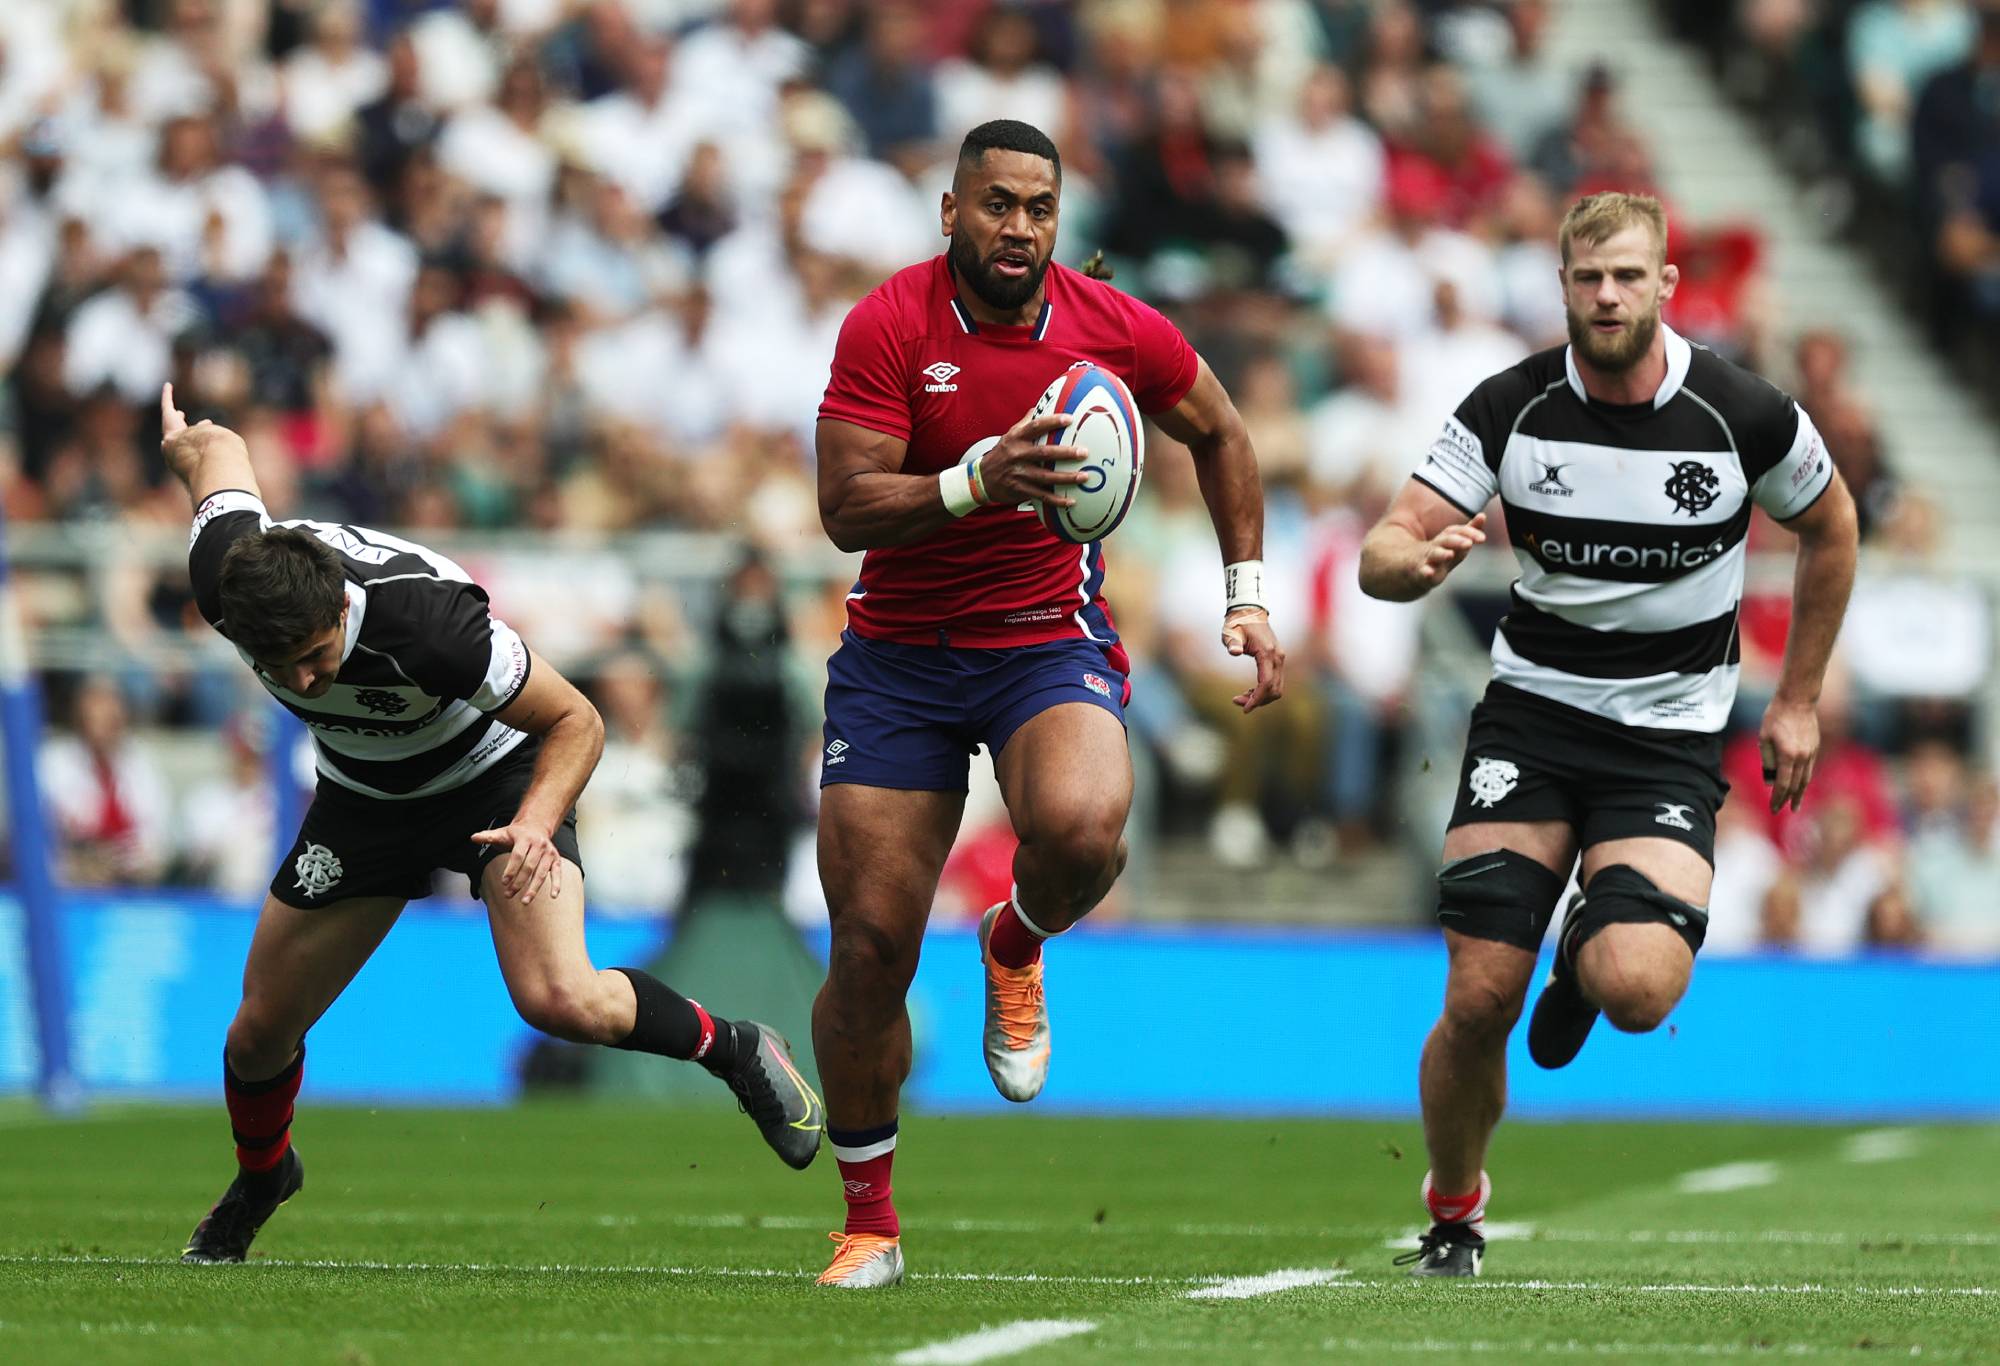 Joe Cokanasiga of England runs with the ball during the International match between England and Barbarians at Twickenham Stadium on June 19, 2022 in London, England. (Photo by David Rogers/Getty Images)